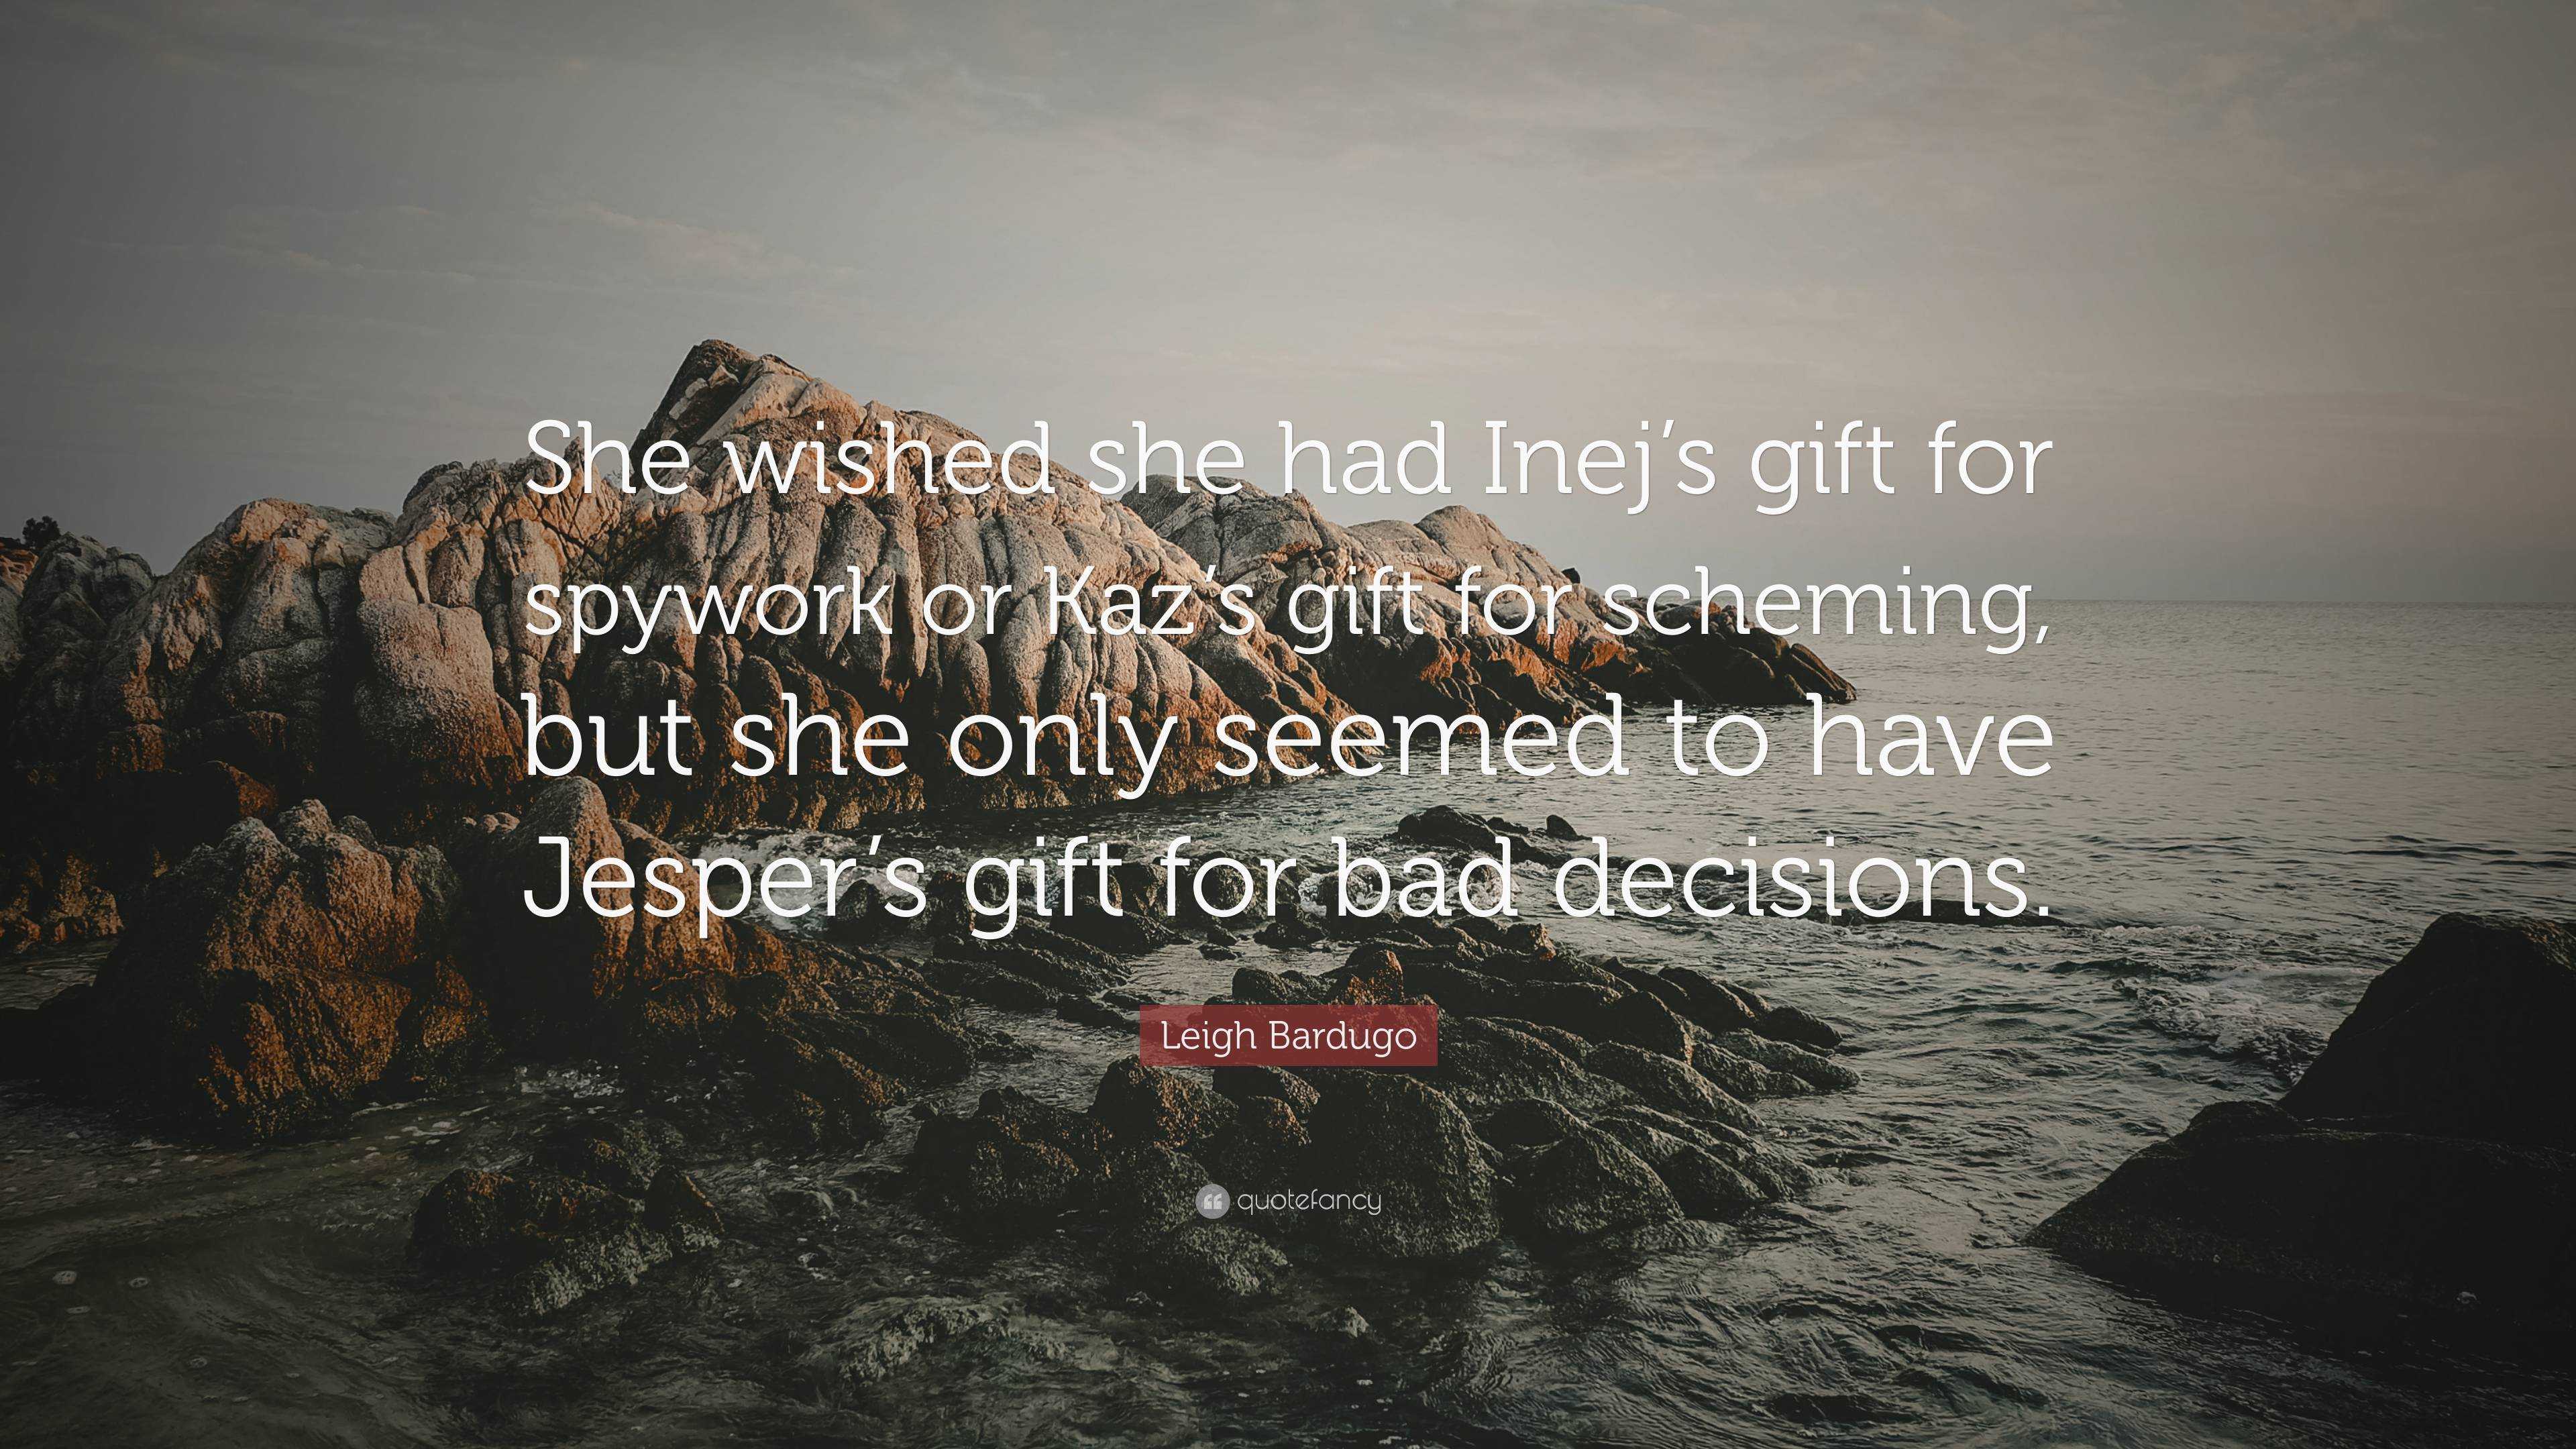 Leigh Bardugo Quote: “She wished she had Inej's gift for spywork or Kaz's  gift for scheming, but she only seemed to have Jesper's gift for bad...”